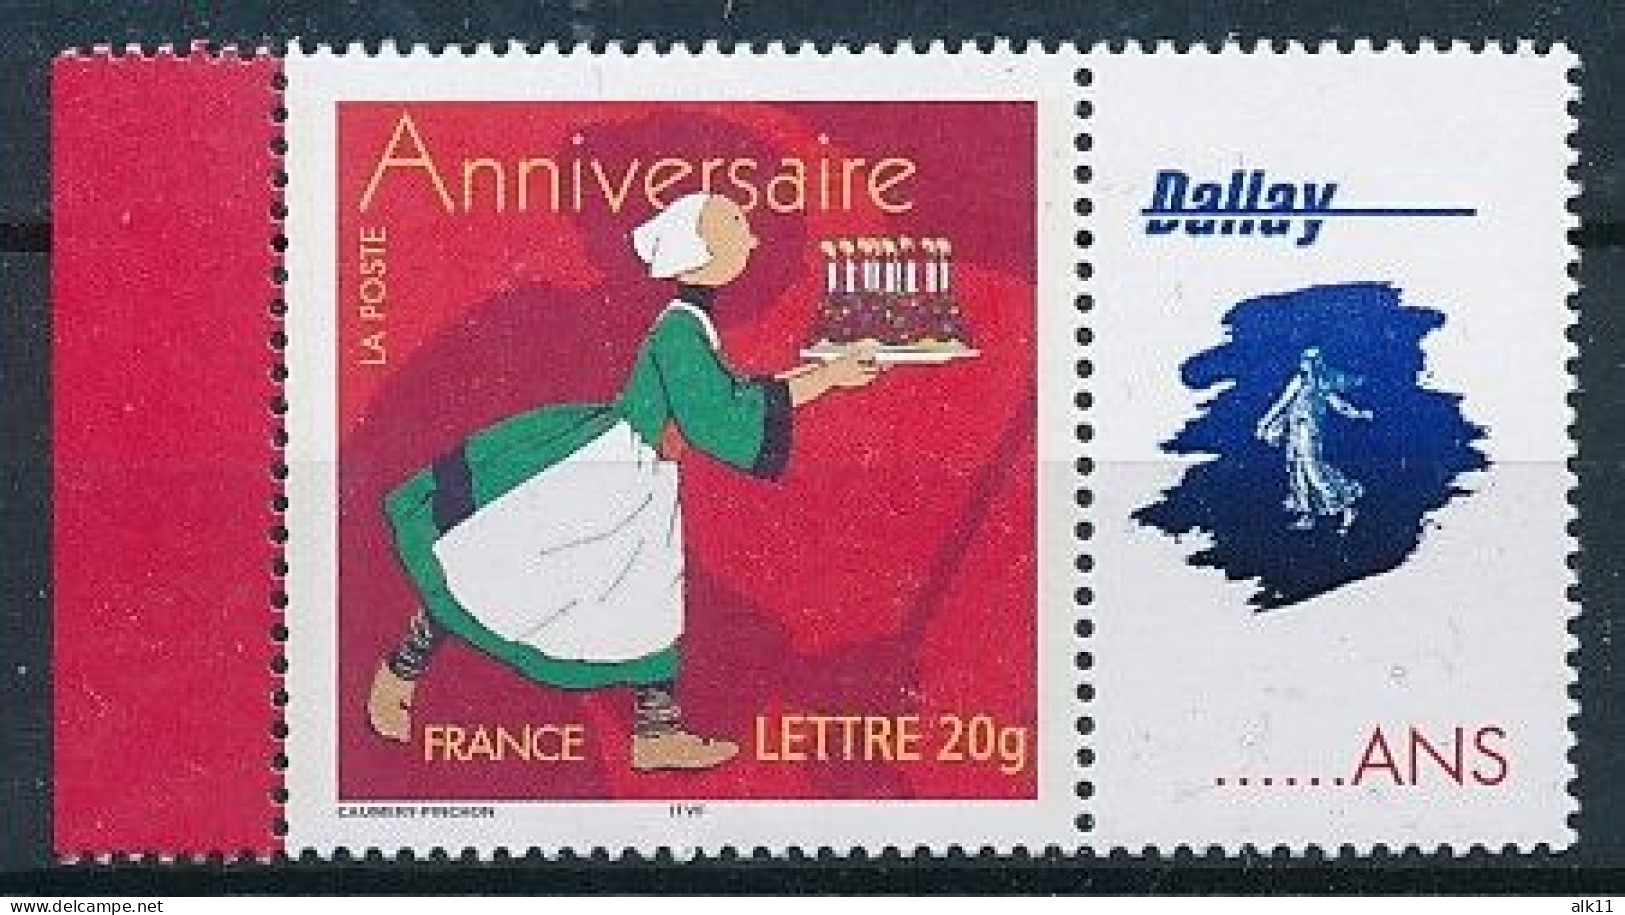 France 2005 - 3778Aa Timbre Personnalisé Bécassine Logo Dallay - Neuf - Unused Stamps